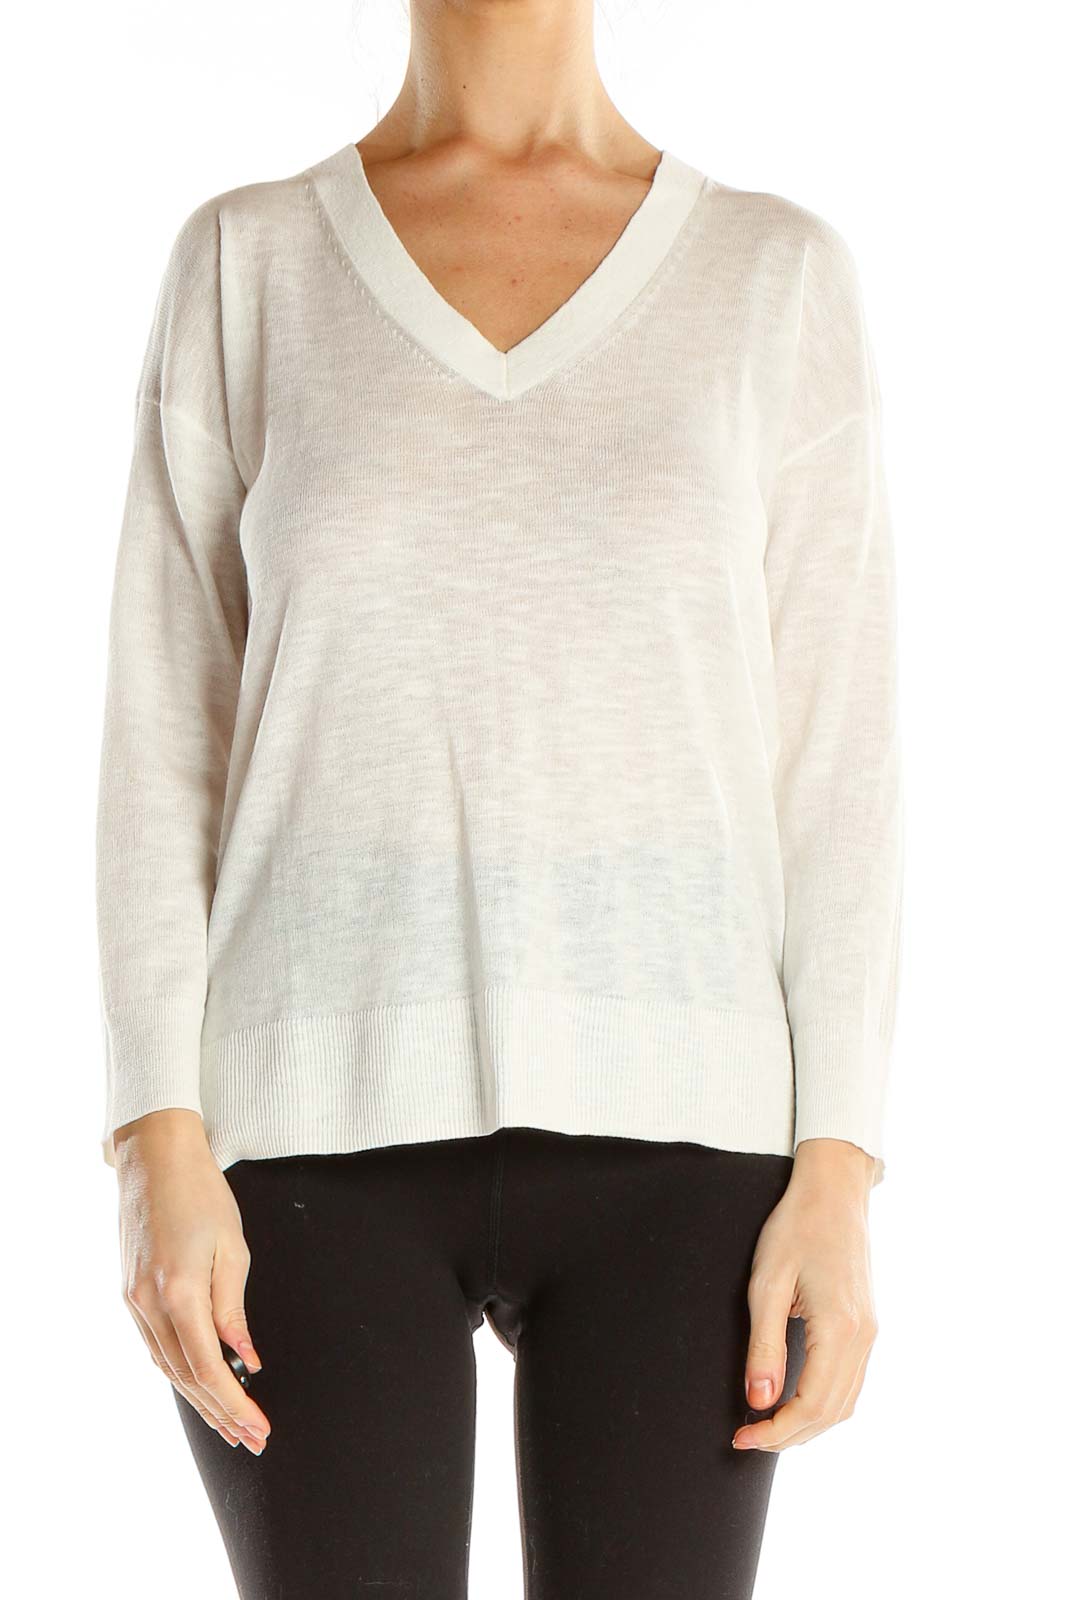 White Casual Knit Top Front